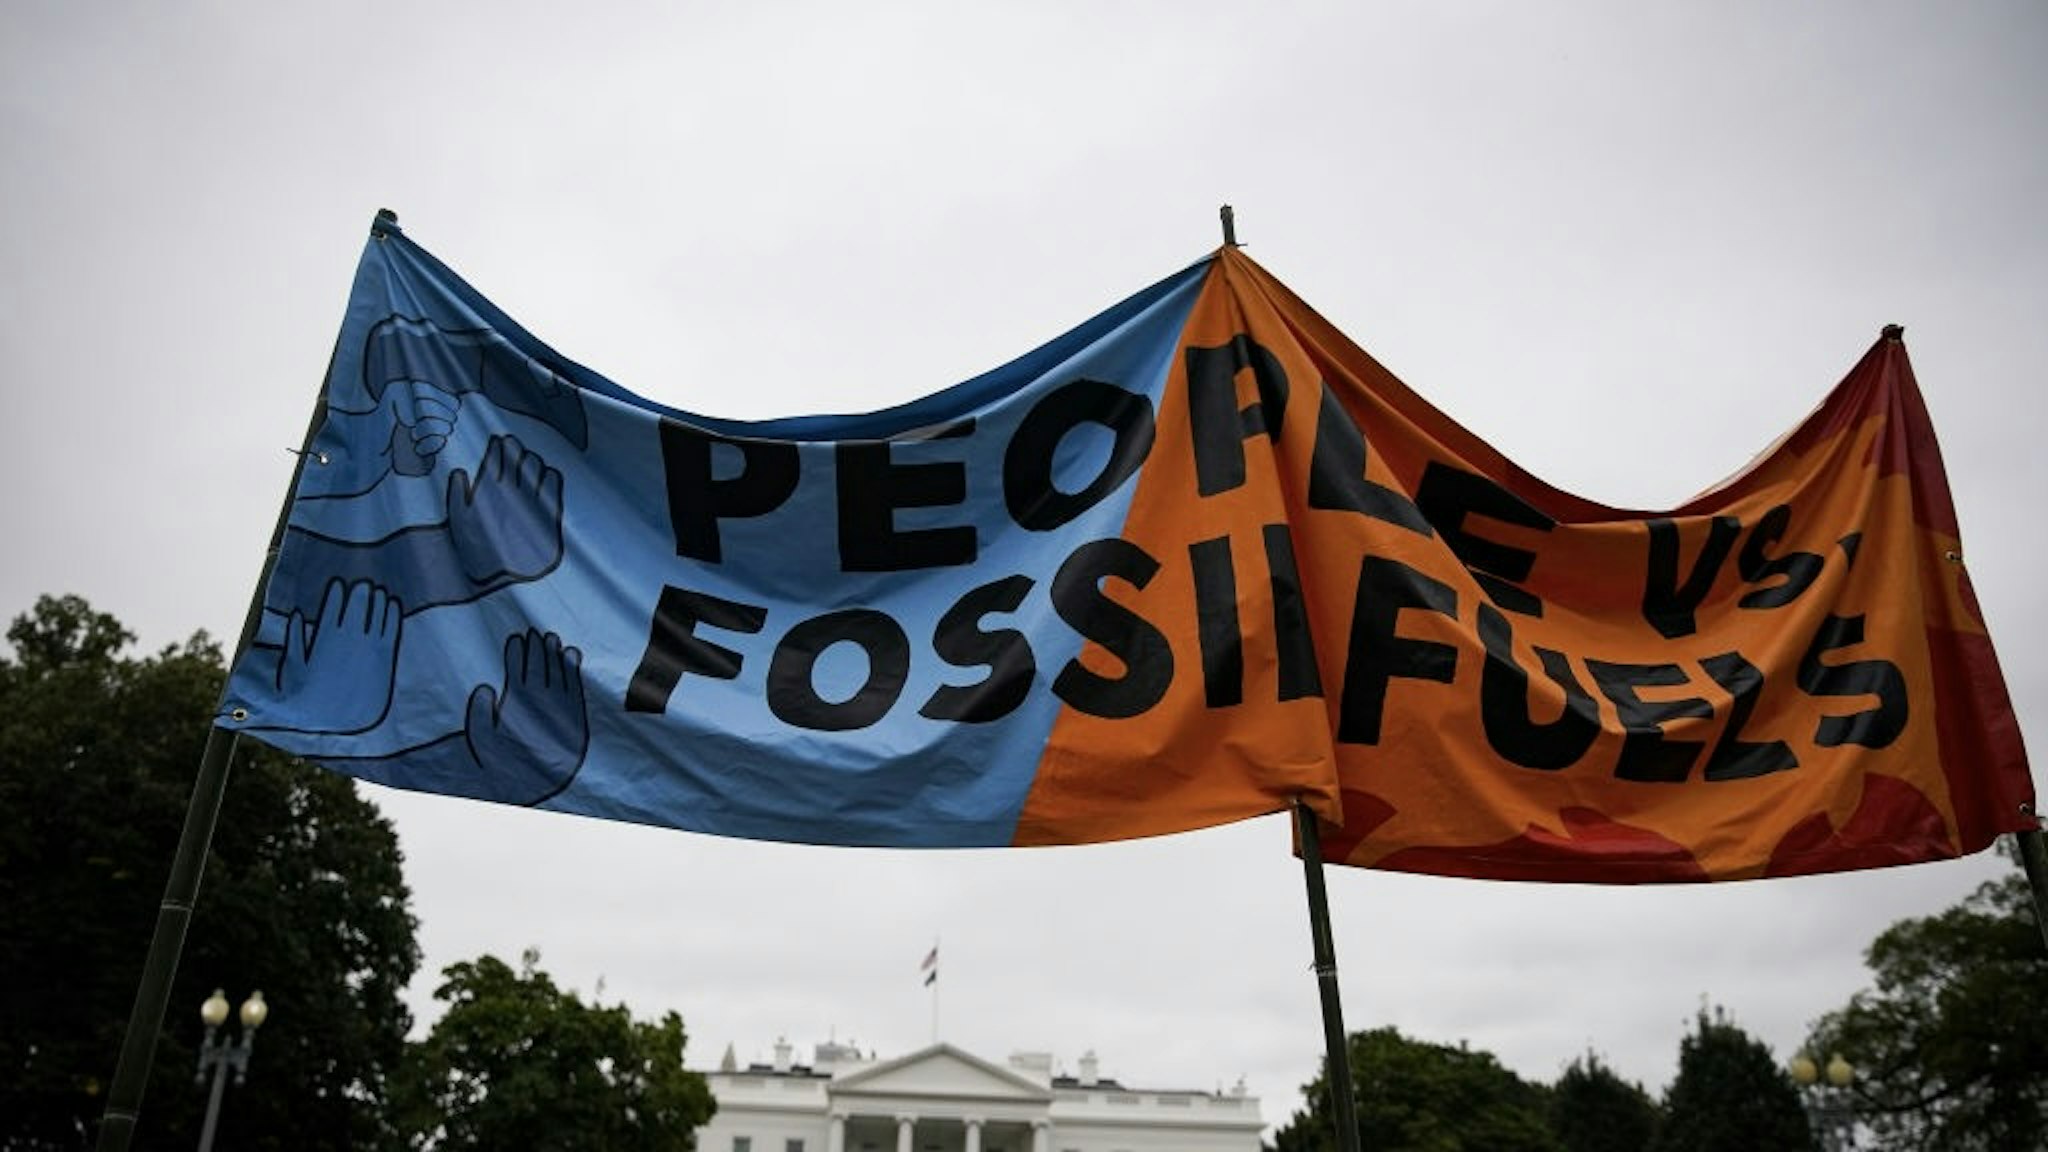 WHO Says Climate Change Is Single Biggest Health Threat Demonstrators hold a "People Vs. Fossil Fuels" banner during a climate change protest on Indigenous Peoples' Day outside the White House in Washington, D.C., U.S., on Monday, Oct. 11, 2021. Climate change is the single biggest health threat that humanity faces as extreme weather events kill thousands and weakens healthcare systems where they are needed the most, according to a new report by the World Health Organization. Photographer: Al Drago/Bloomberg via Getty Images Bloomberg / Contributor